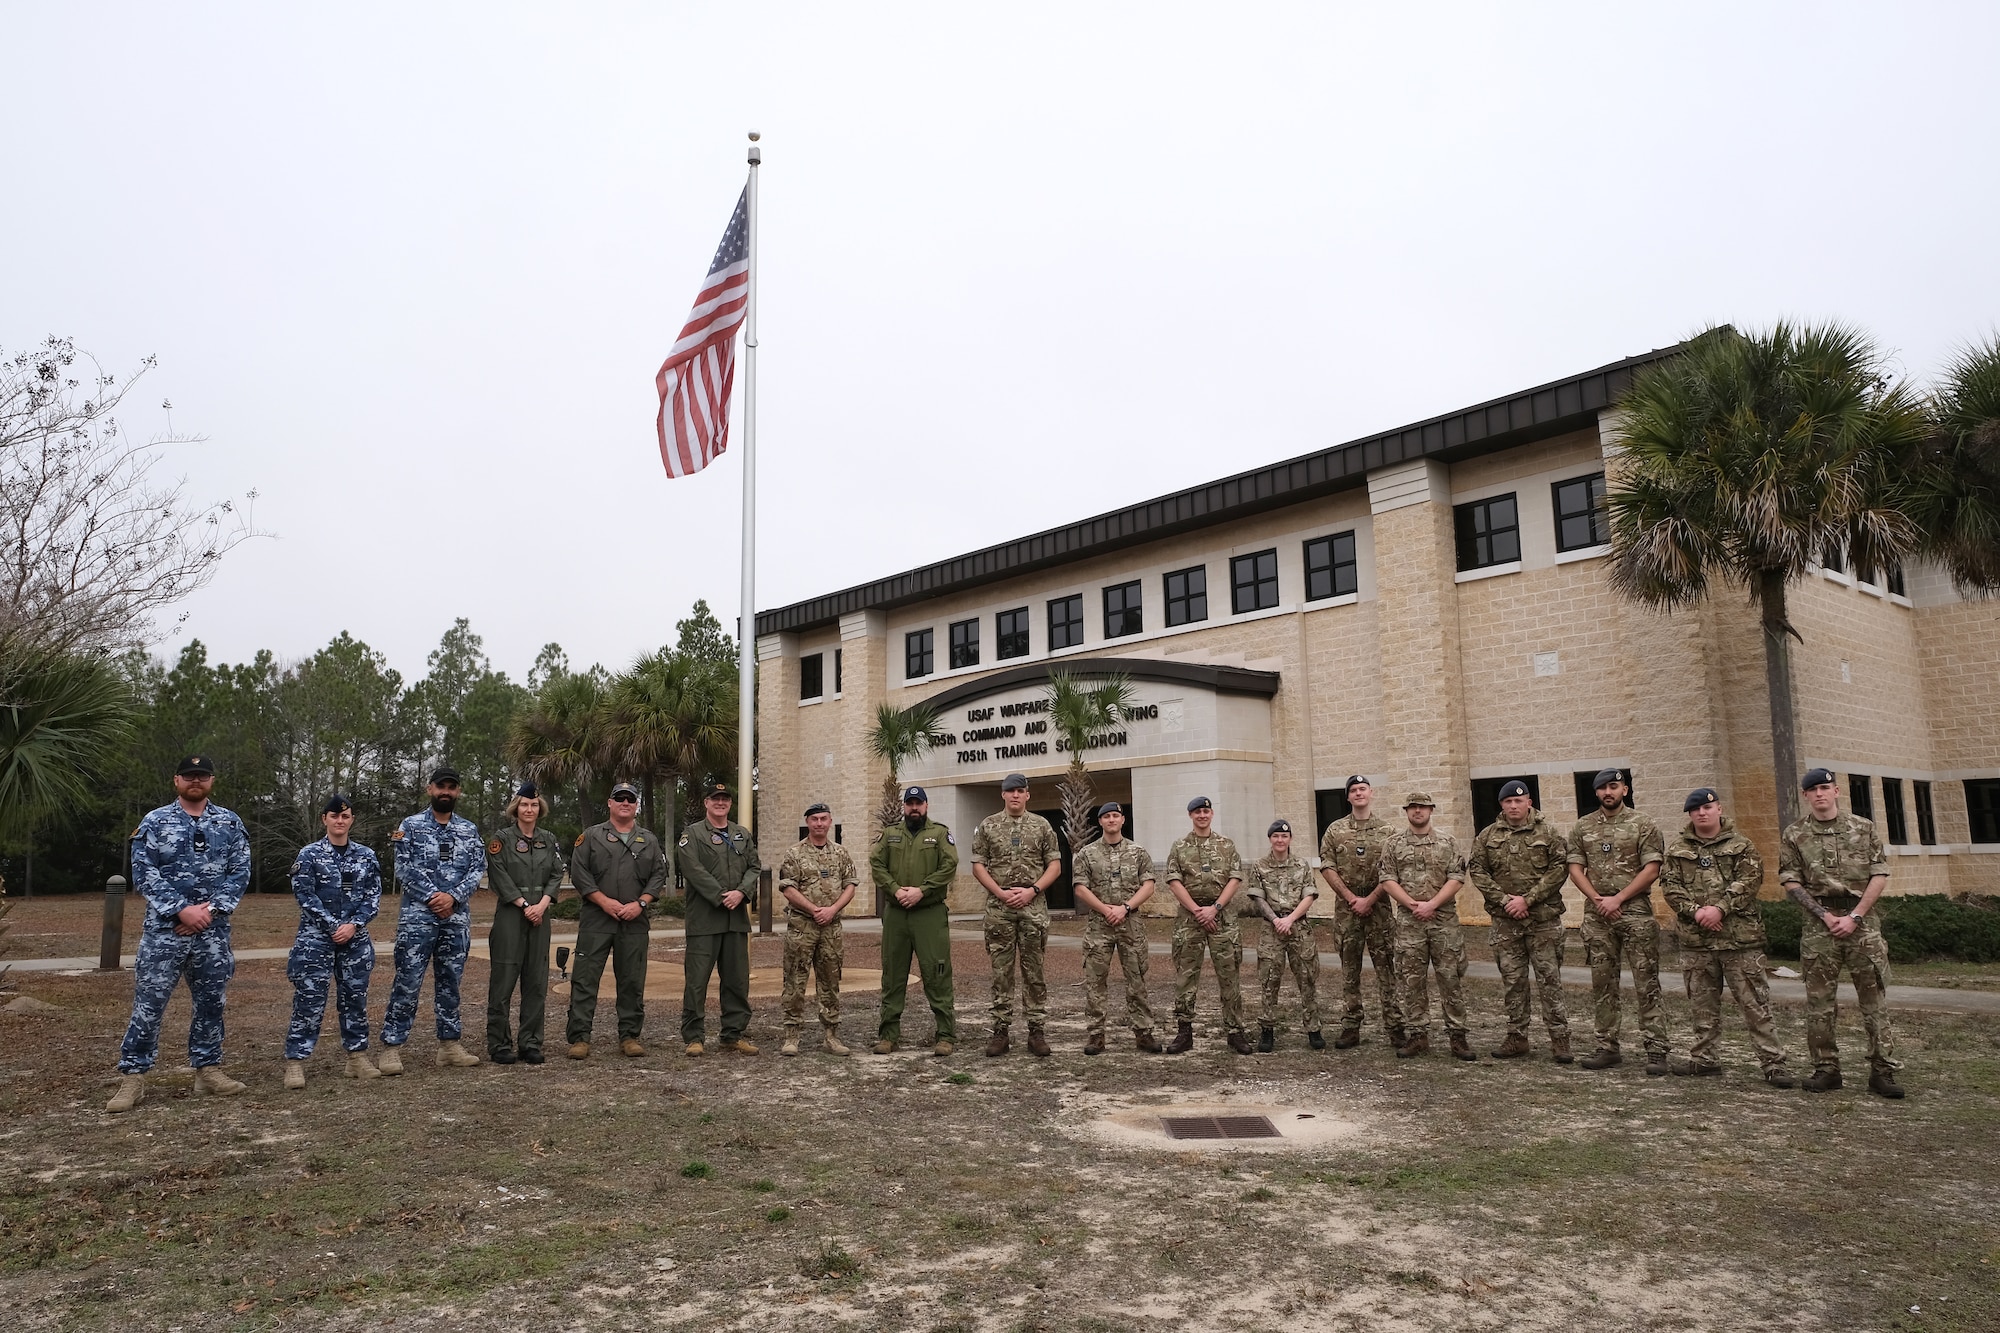 United Kingdom, Royal Air Force, Royal Australian Air Force, and Royal Canadian Air Force members stand outside a building with a U.S flag flying in the background.